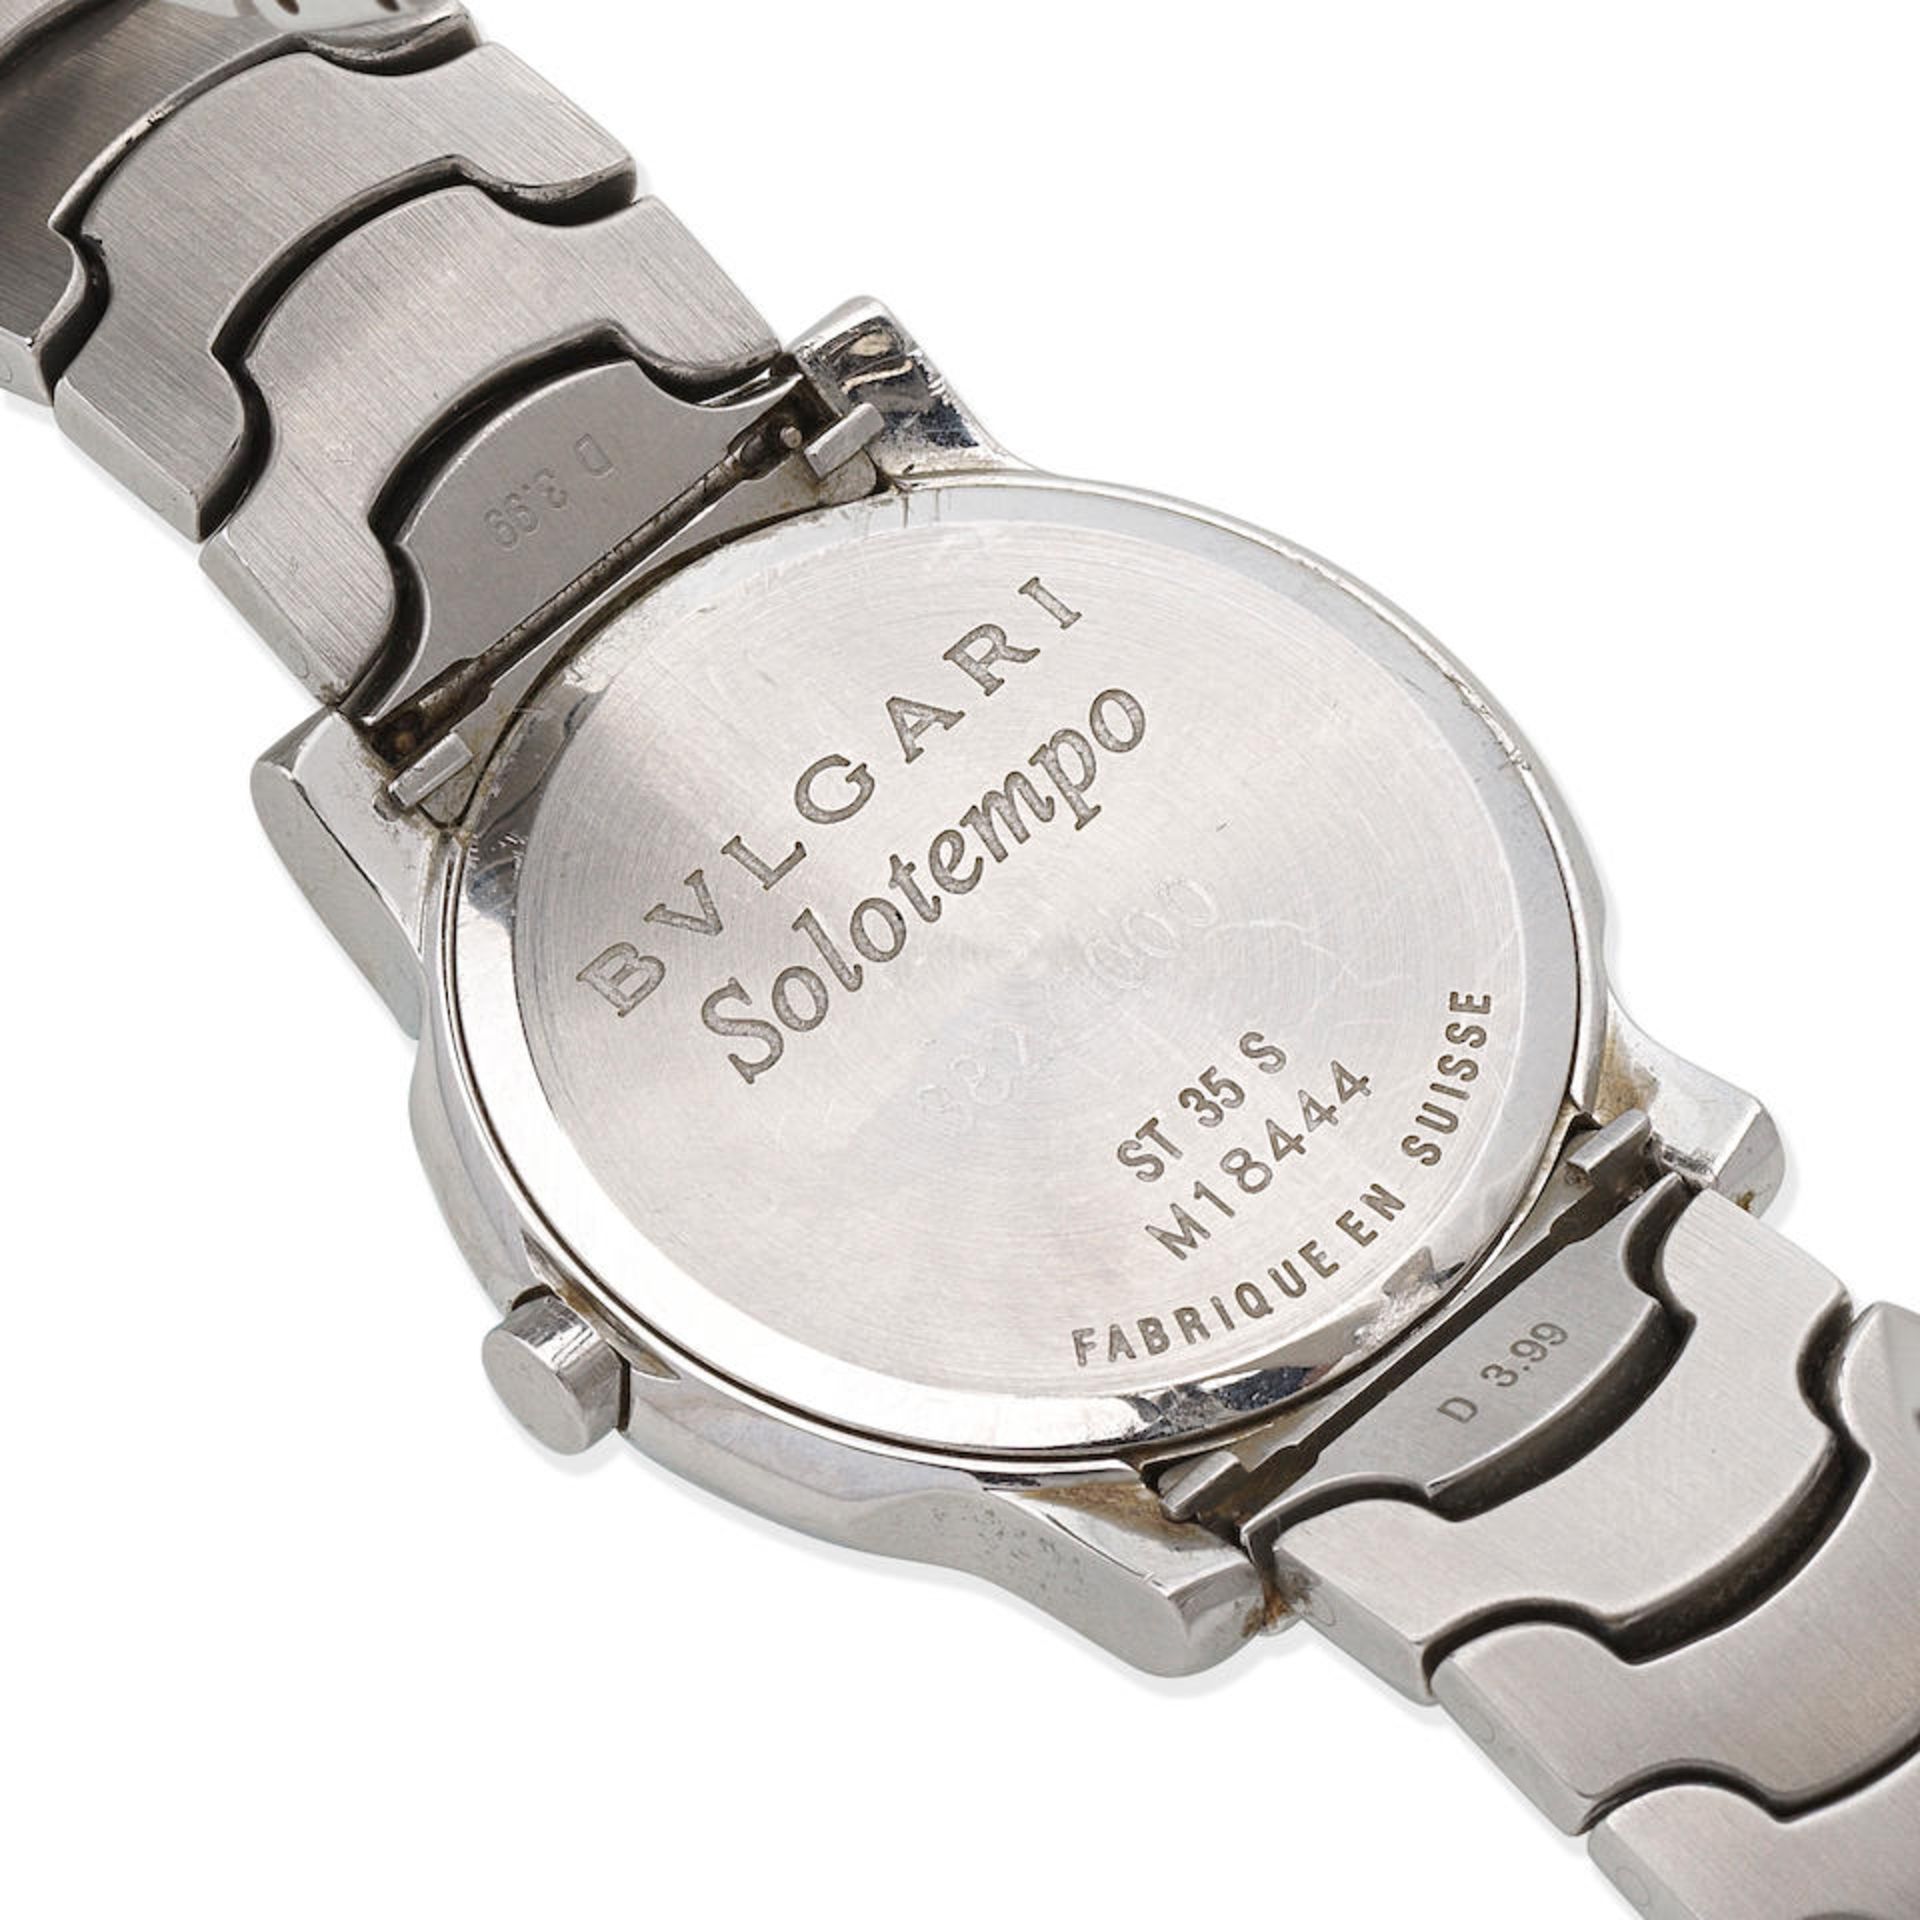 Bulgari. A Limited Edition stainless steel quartz calendar bracelet watch Solotempo, Ref: ST 35... - Image 4 of 4